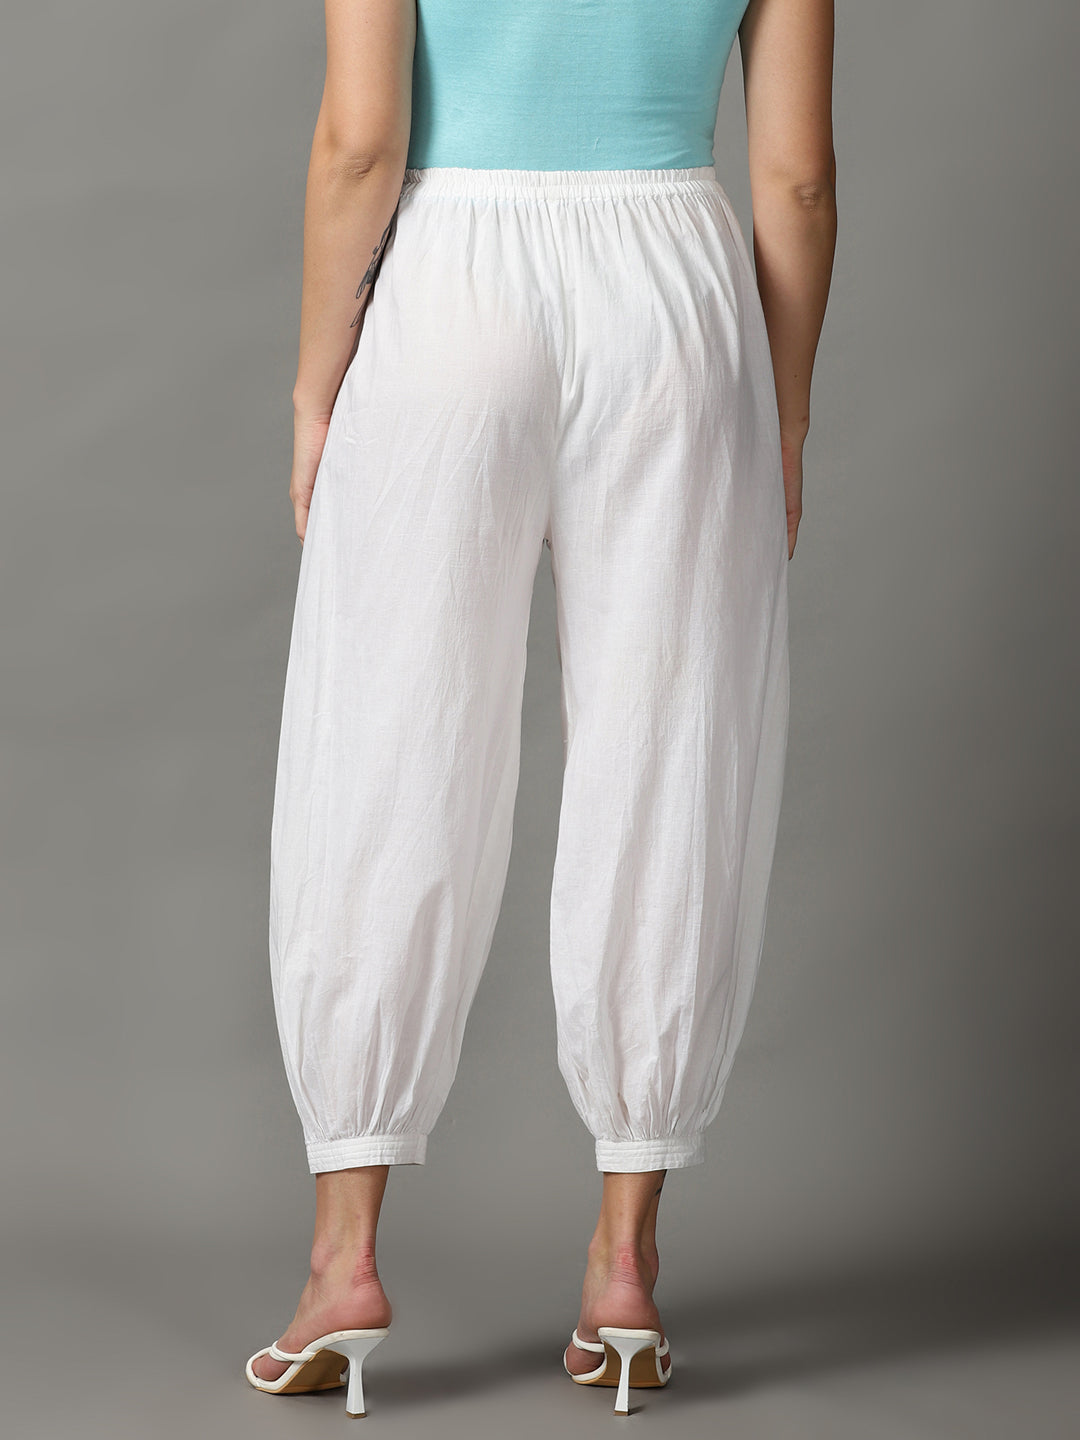 Women White Solid Cotton Cuff Pant